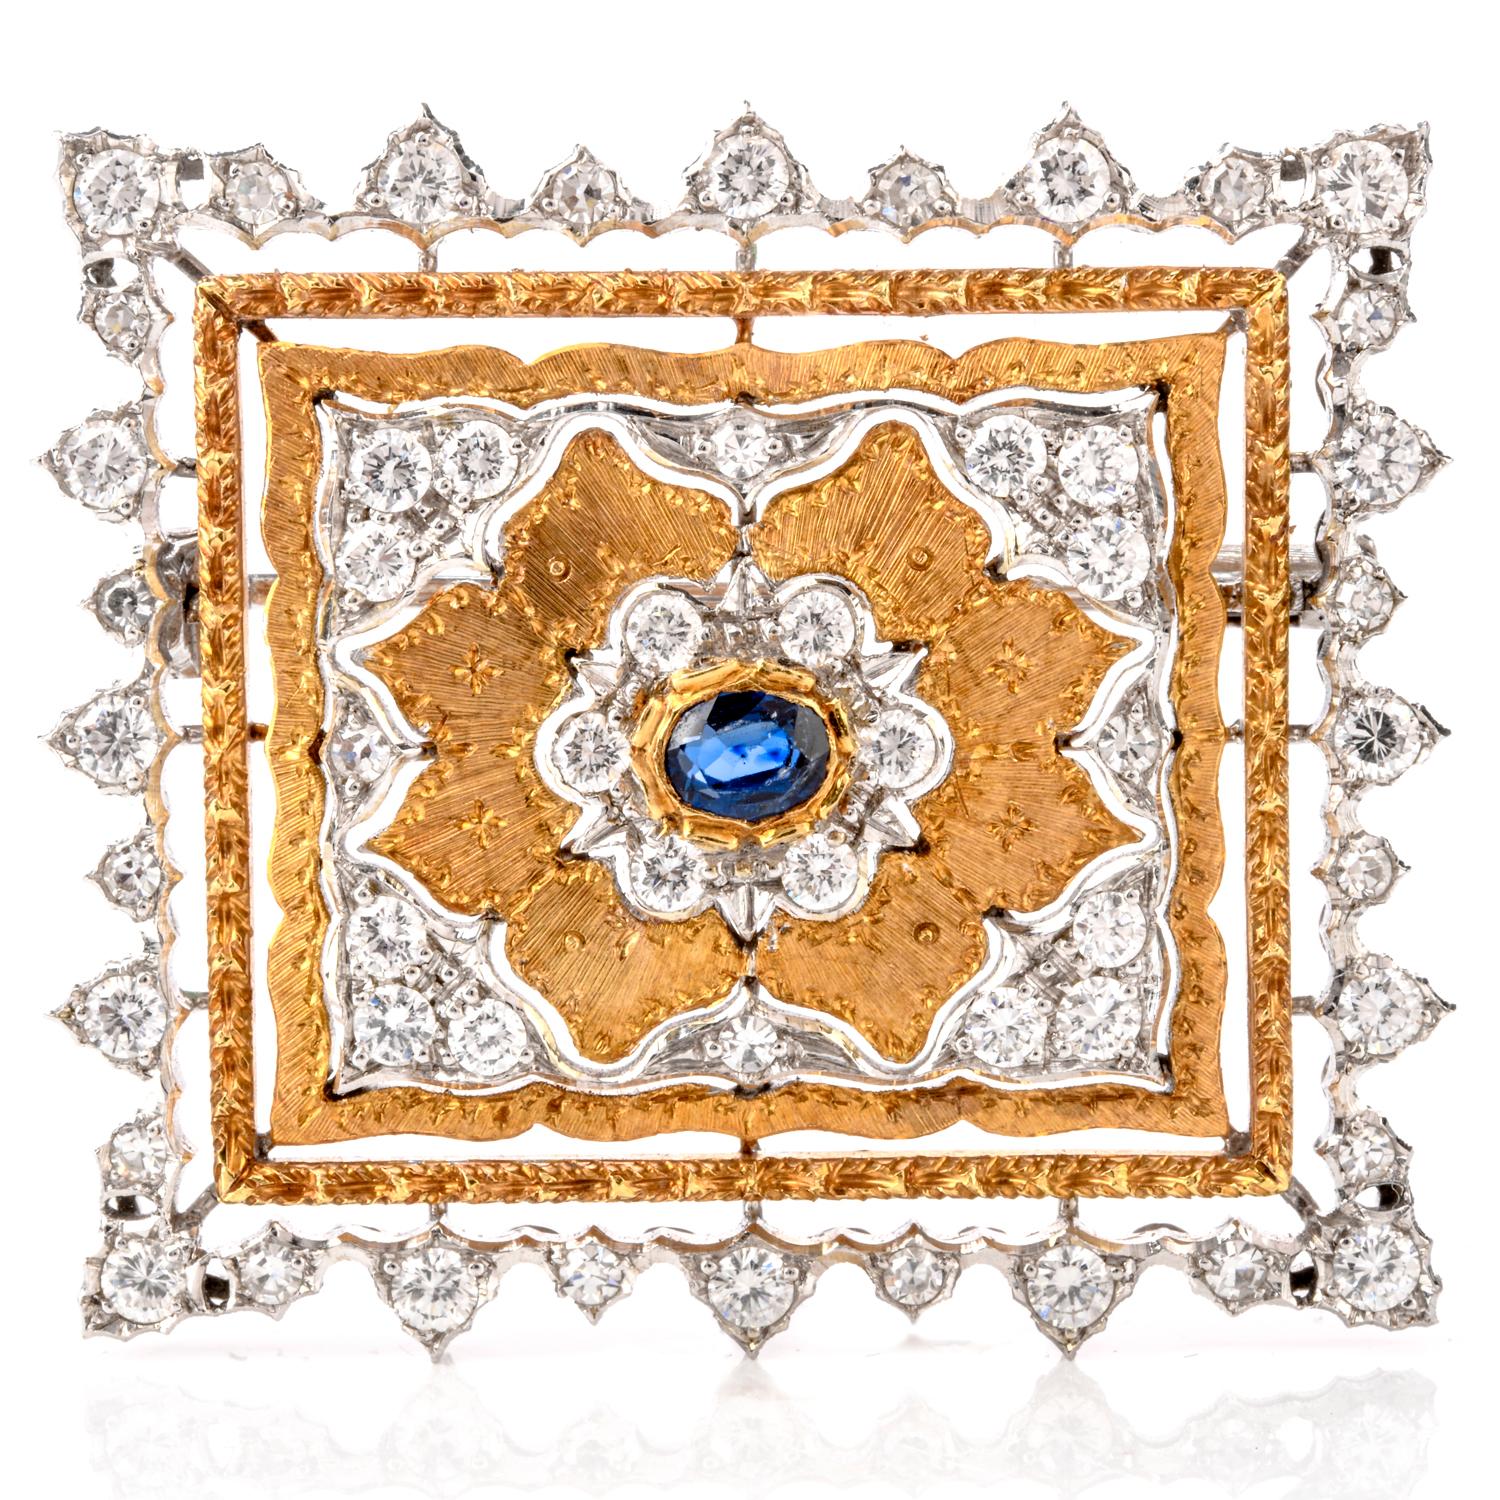 Opulent and Sophisticated describe this Extraordinary square Buccellati Diamond and Sapphire Brooch.

This piece was crafted in 11.8 Grams of Luxurious 18K Gold. Measuring appx. 1 1/8 x 1 1/4 Inch,  this brooch features 1 oval genuine Blue Sapphire